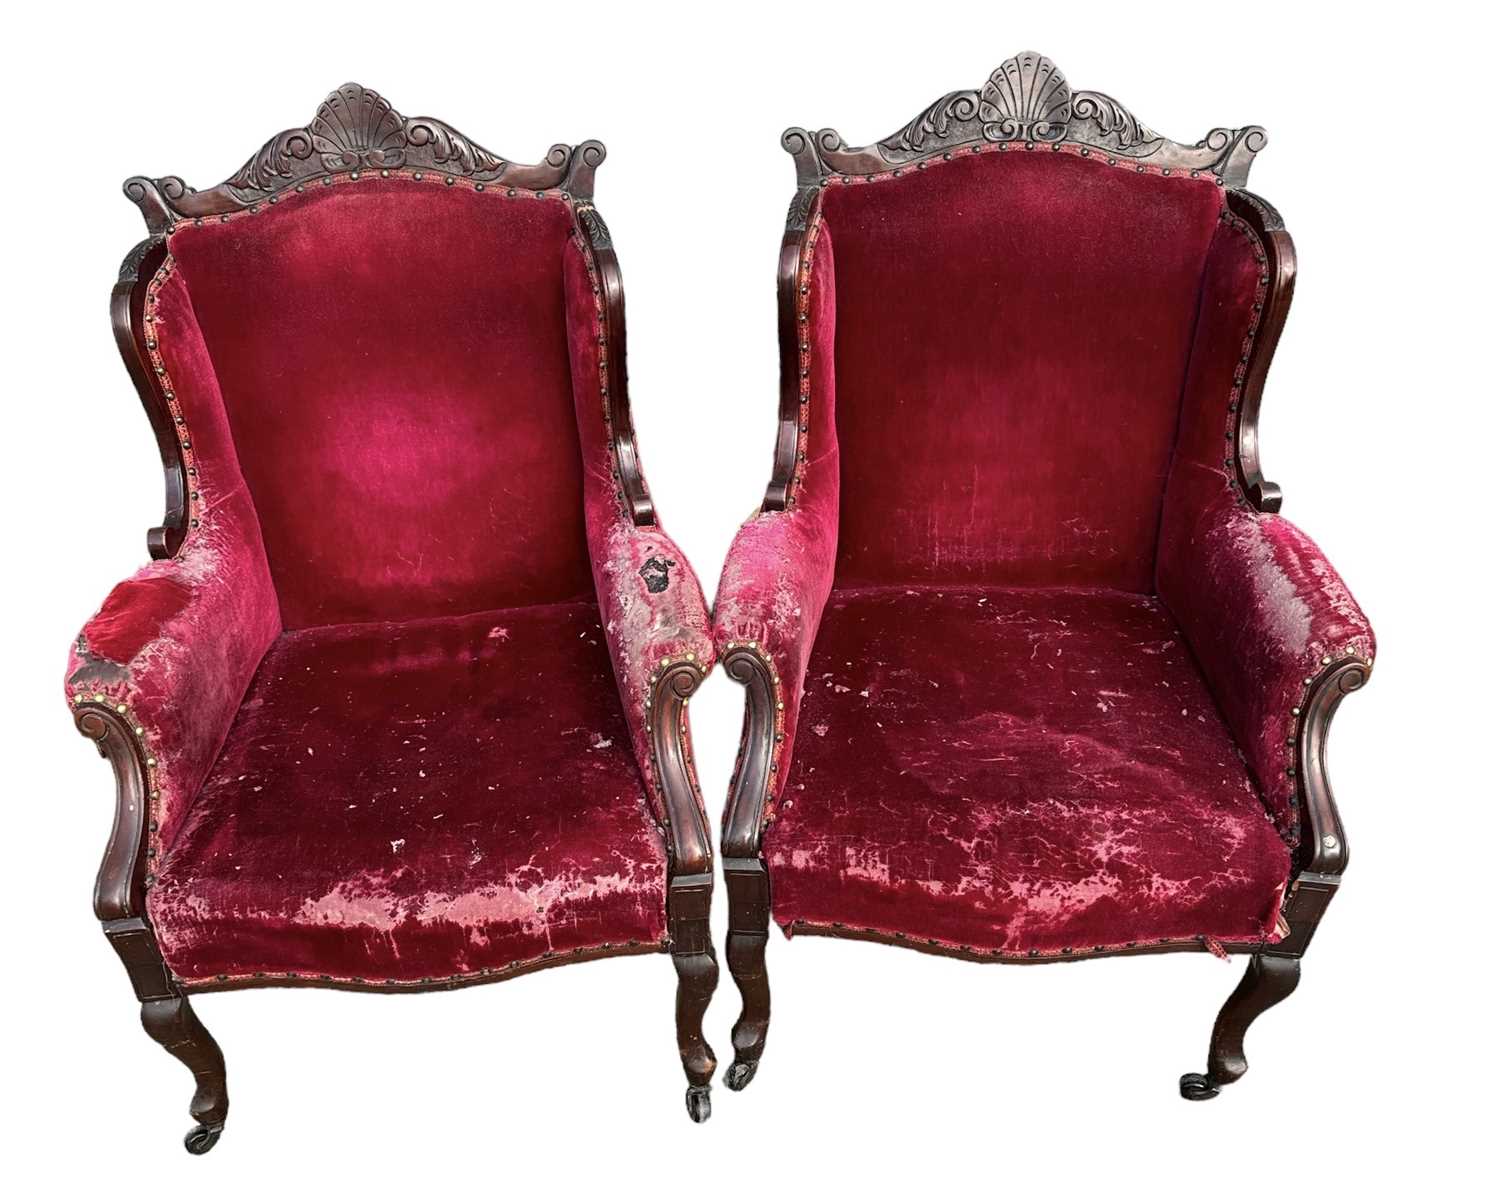 A pair of early 20th century carved mahogany framed and red upholstered armchairs (in need of